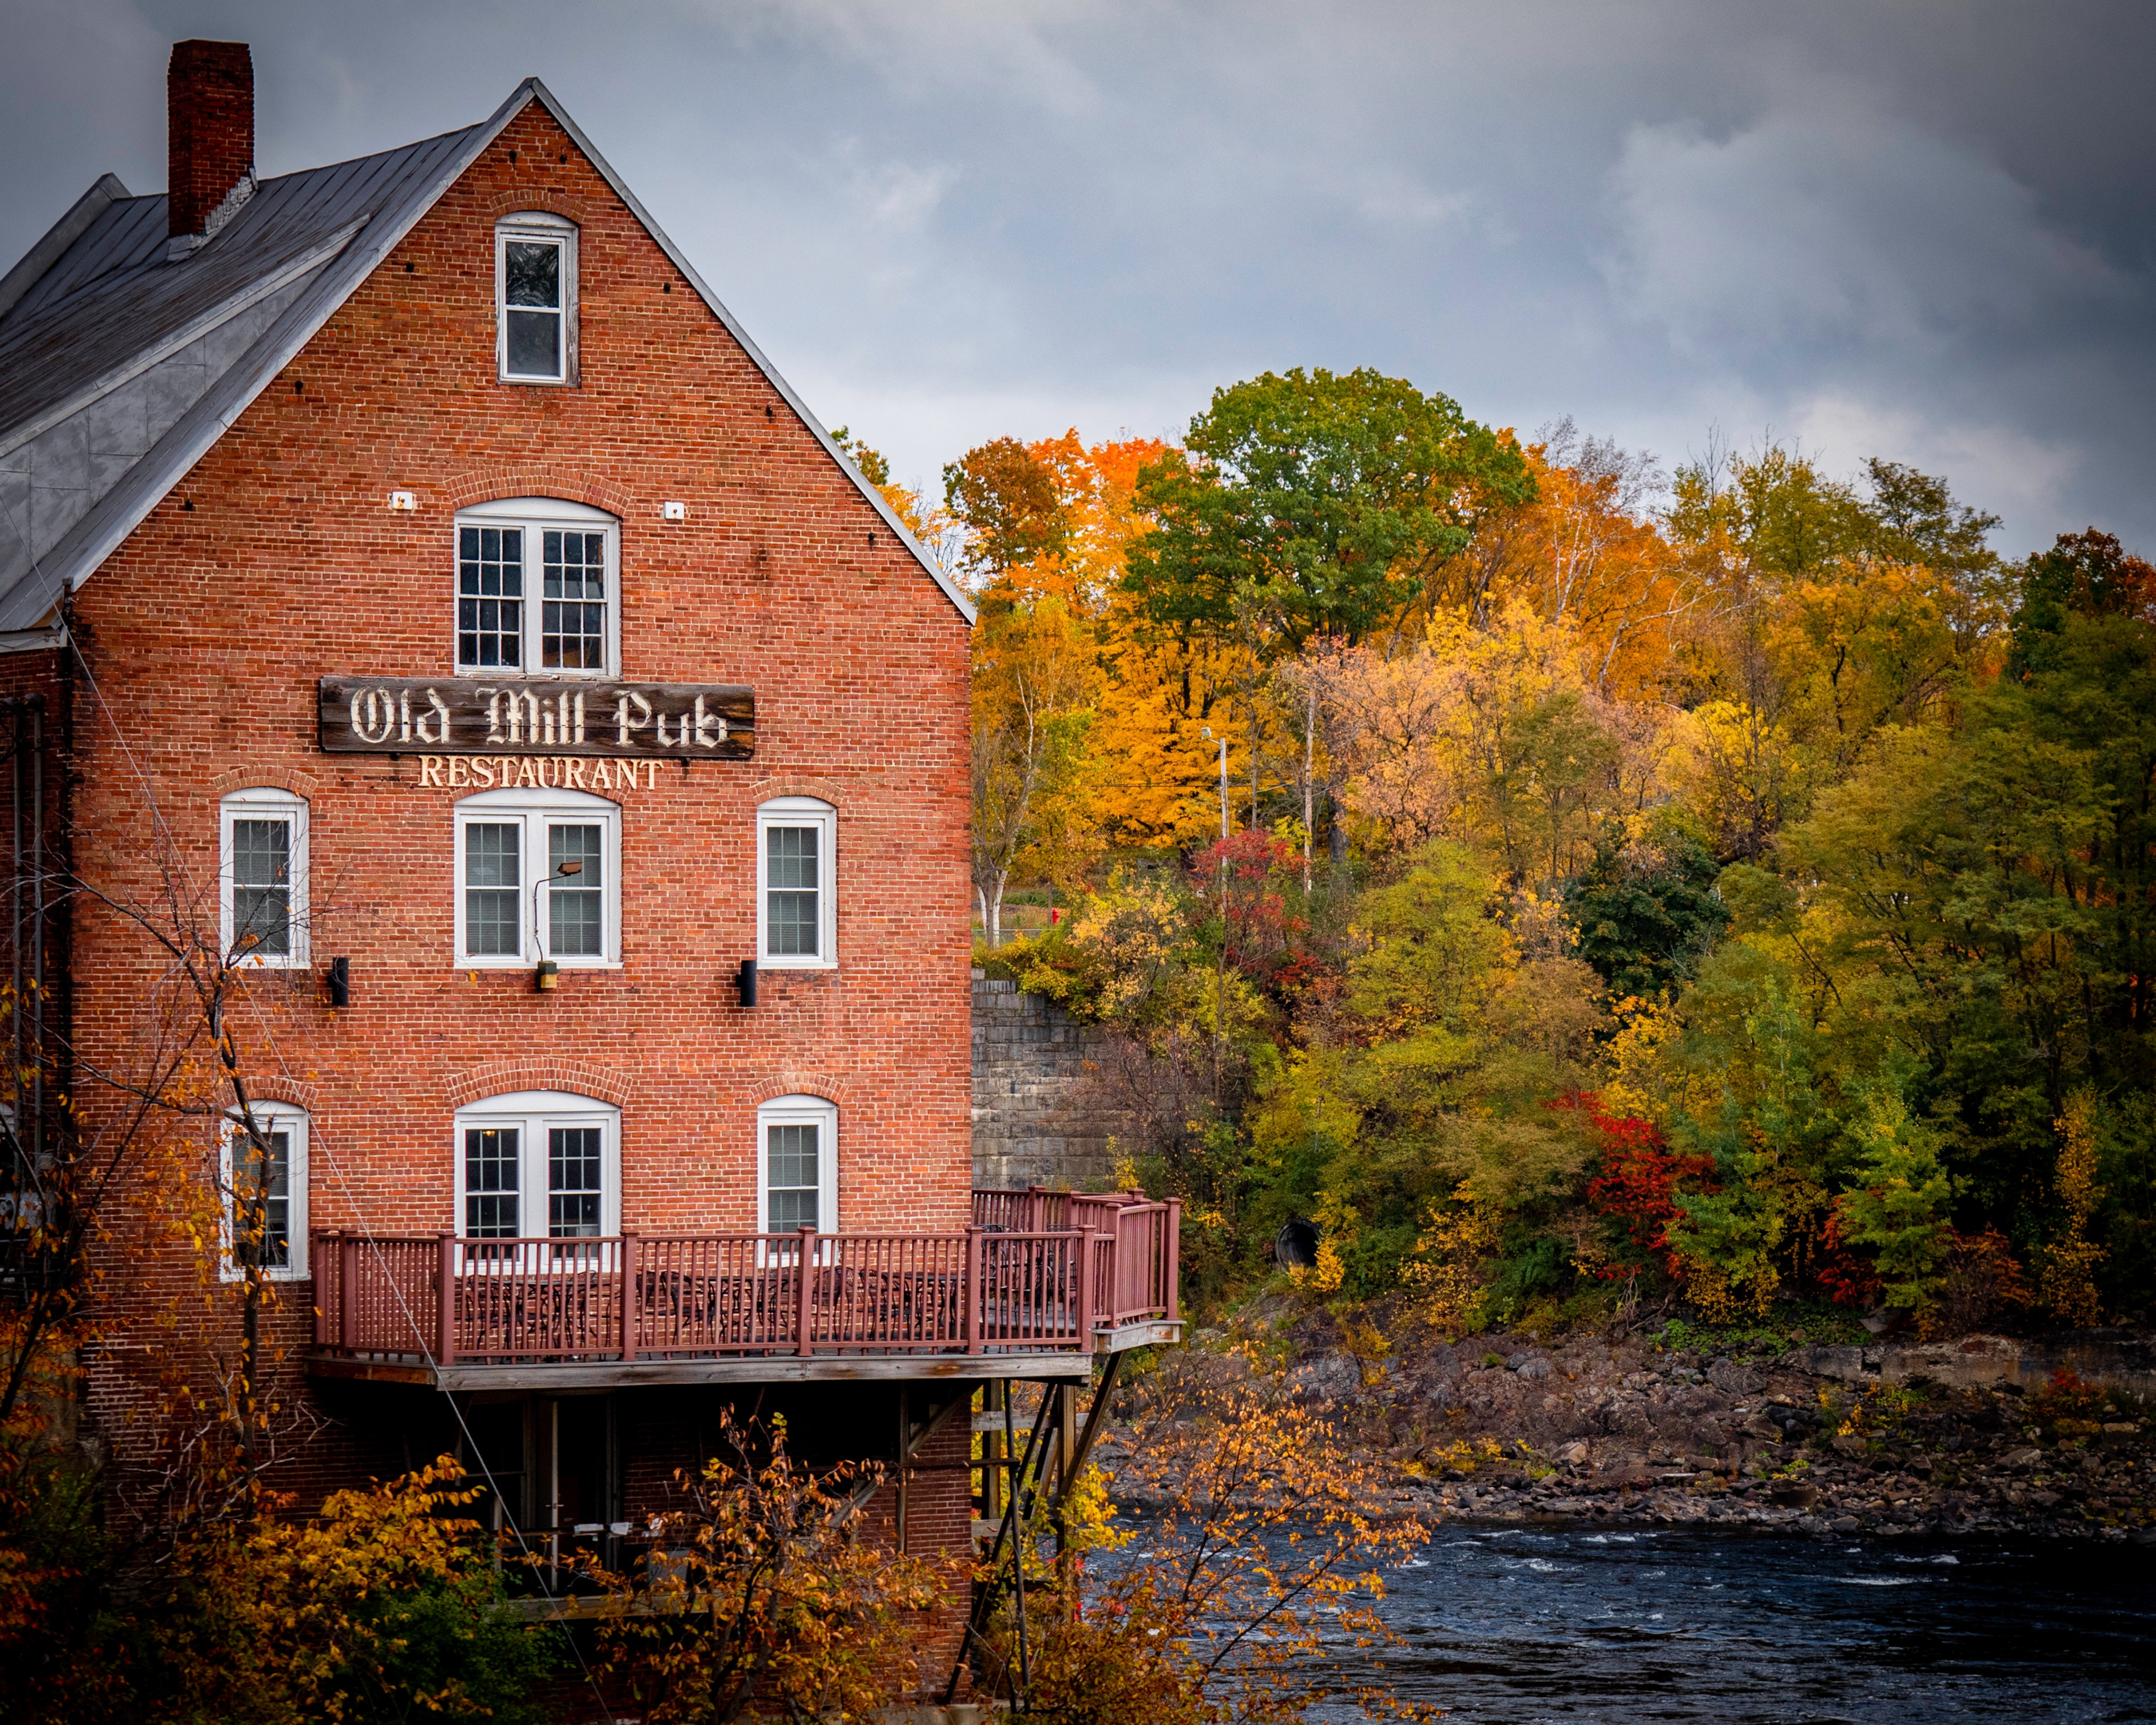 Things to do in Maine - Old Mill Pub